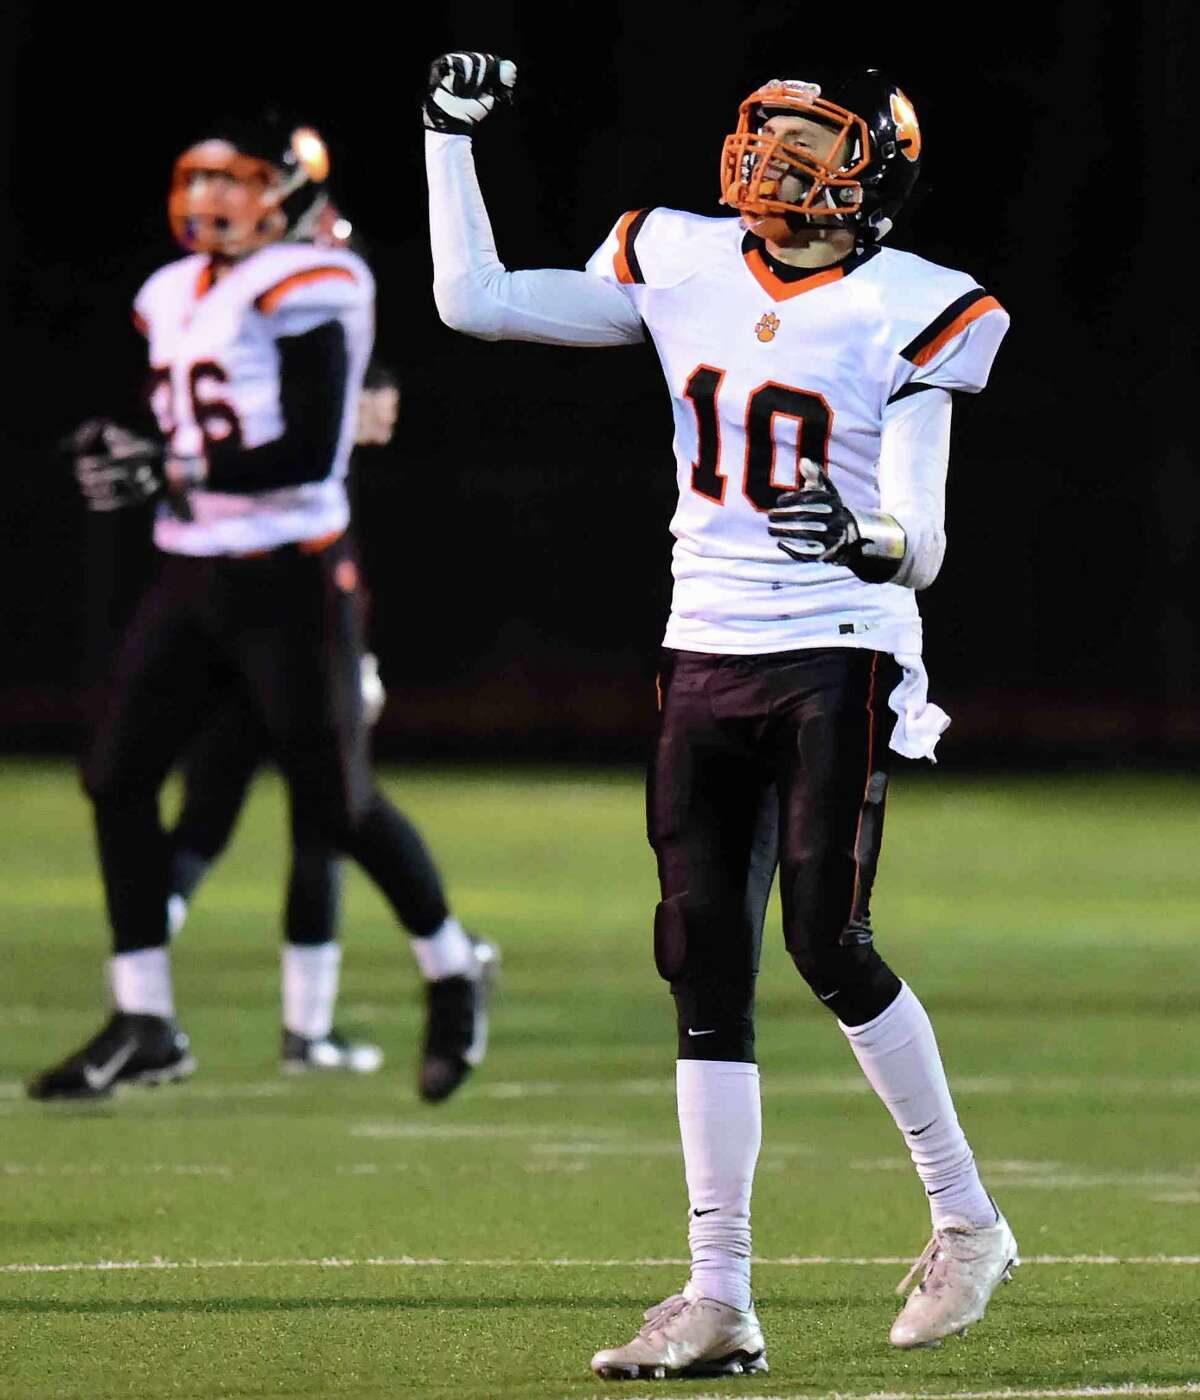 (Peter Hvizdak – New Haven Register) Ridgefield’s Chris Longo celebrates during his team’s Class LL semifinal victory over Shelton. Ridgefield and the FCIAC have brought an unprecedented four state finalists in a four-championship format to championship Saturday and can win three titles for the first time since the SCC in 2012.